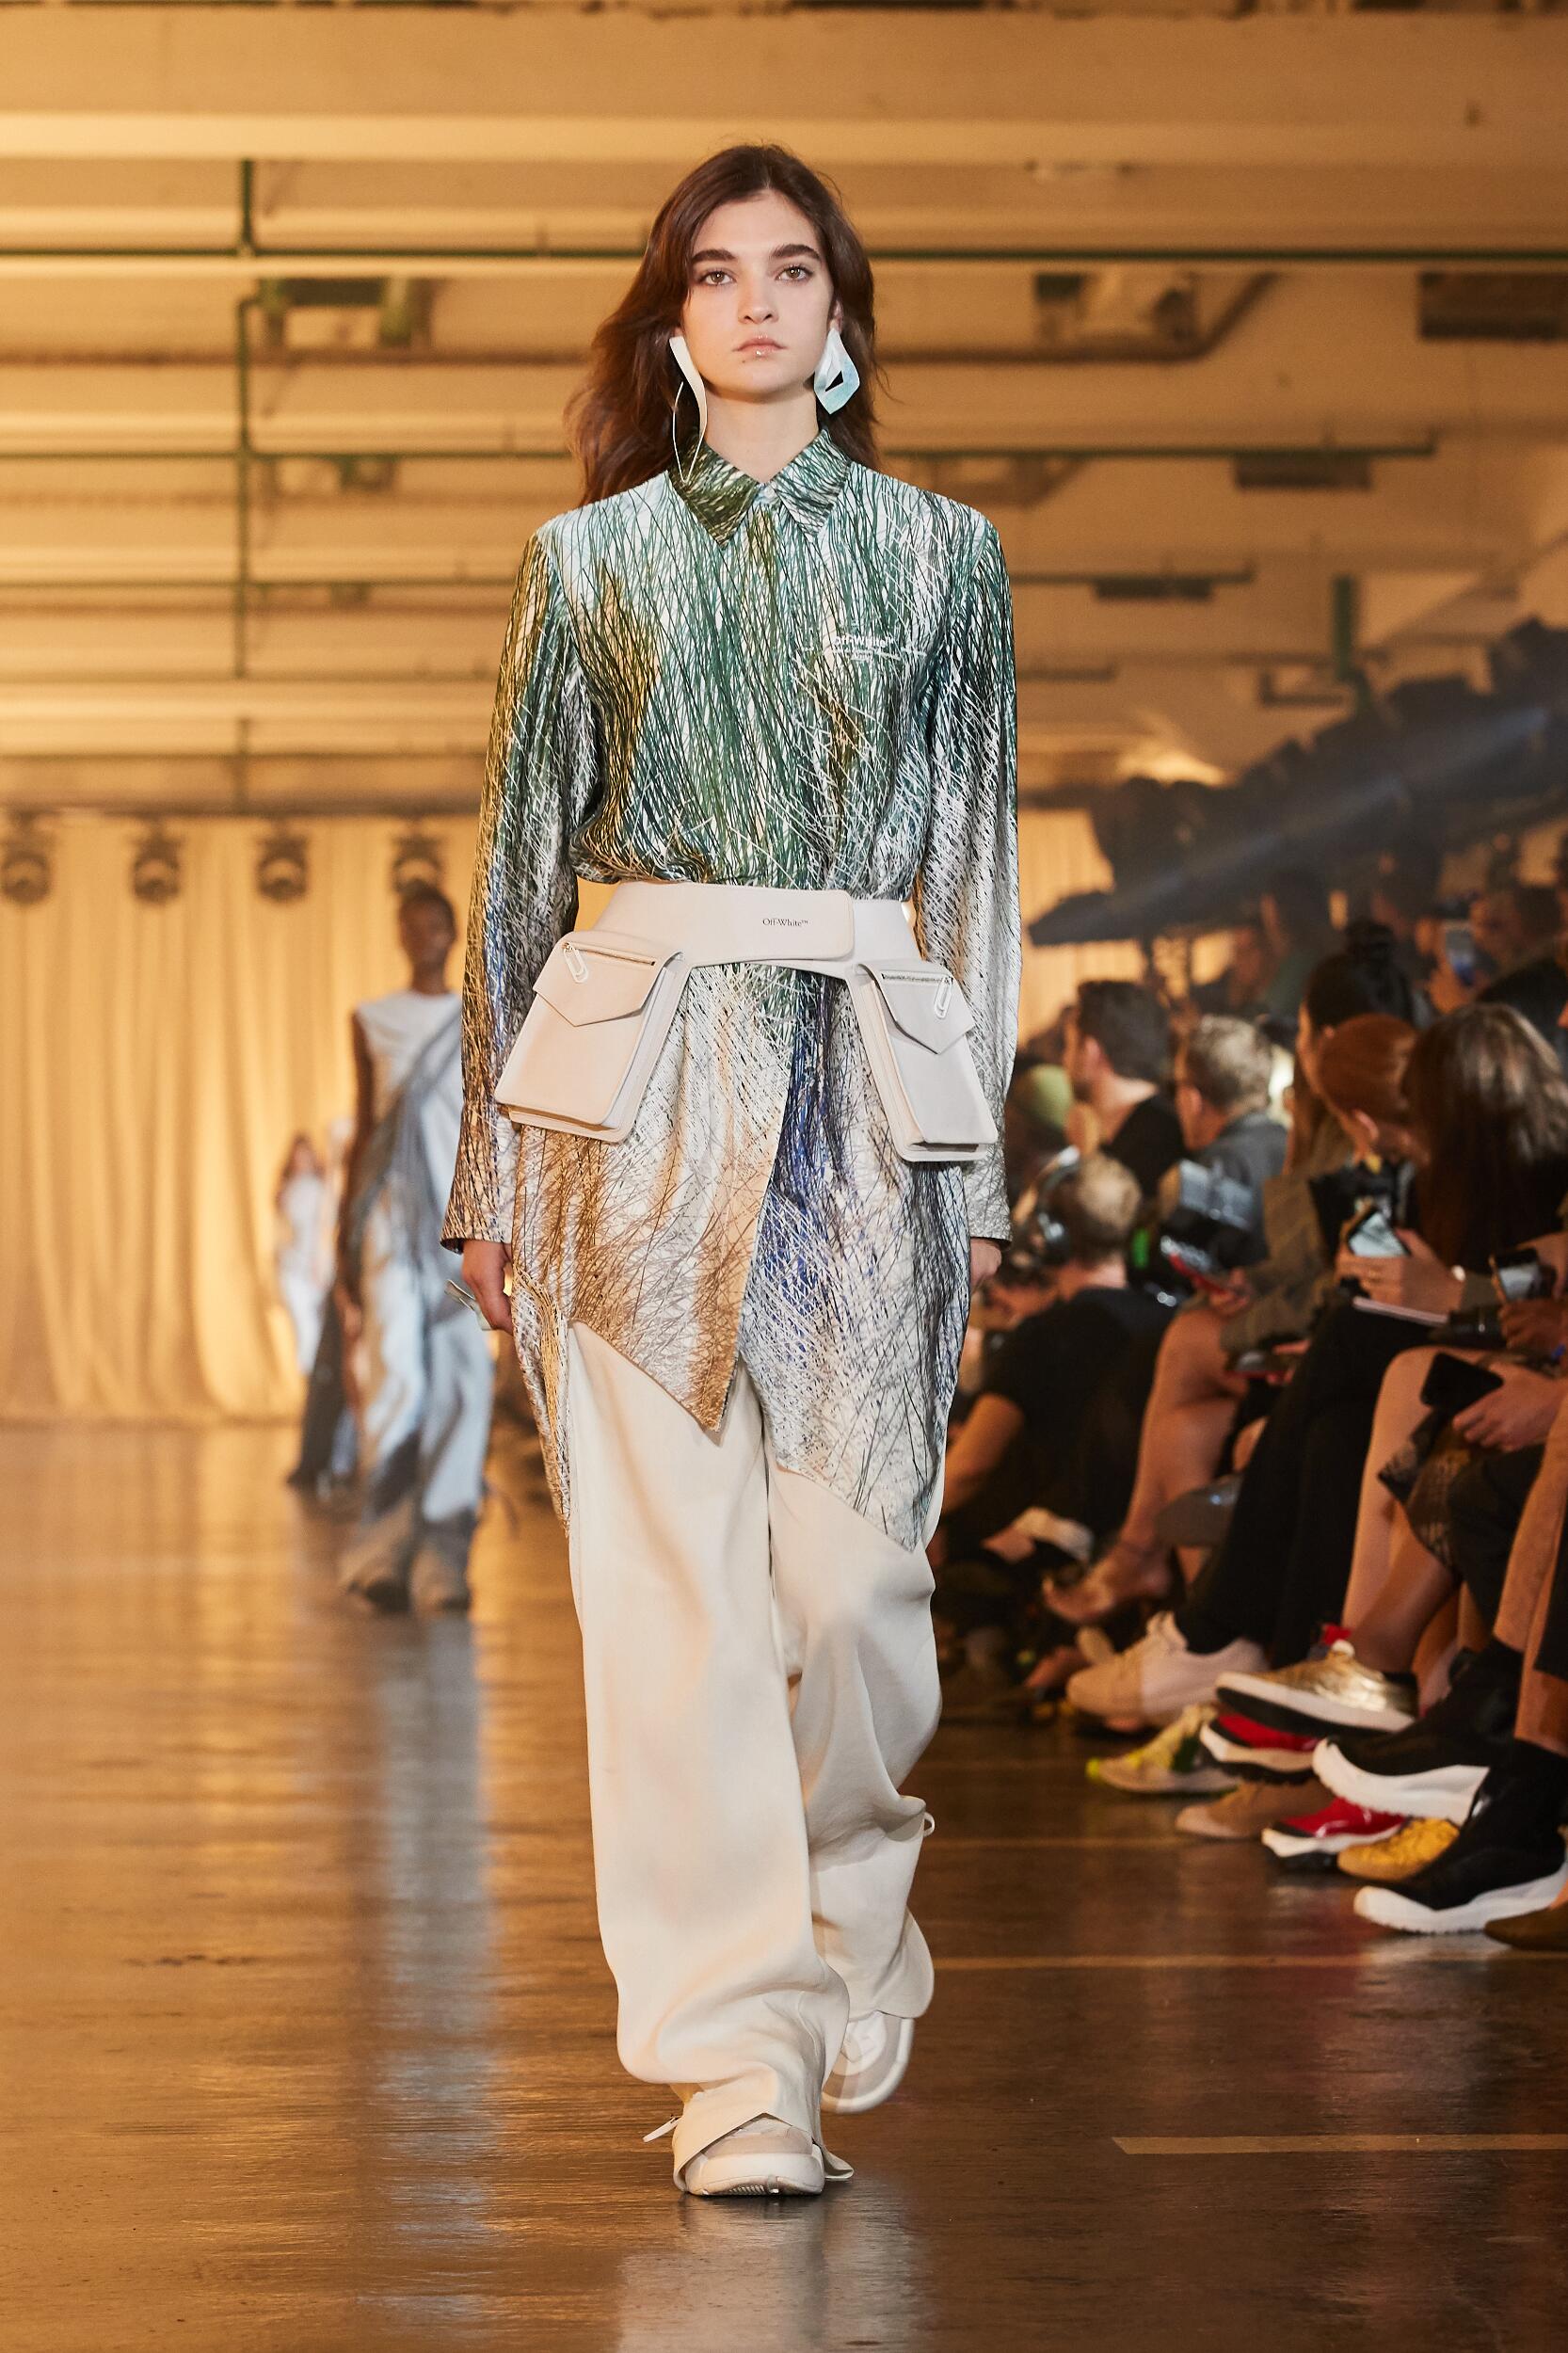 OFF-WHITE C/O VIRGIL ABLOH SPRING SUMMER 2020 WOMEN’S COLLECTION | The ...